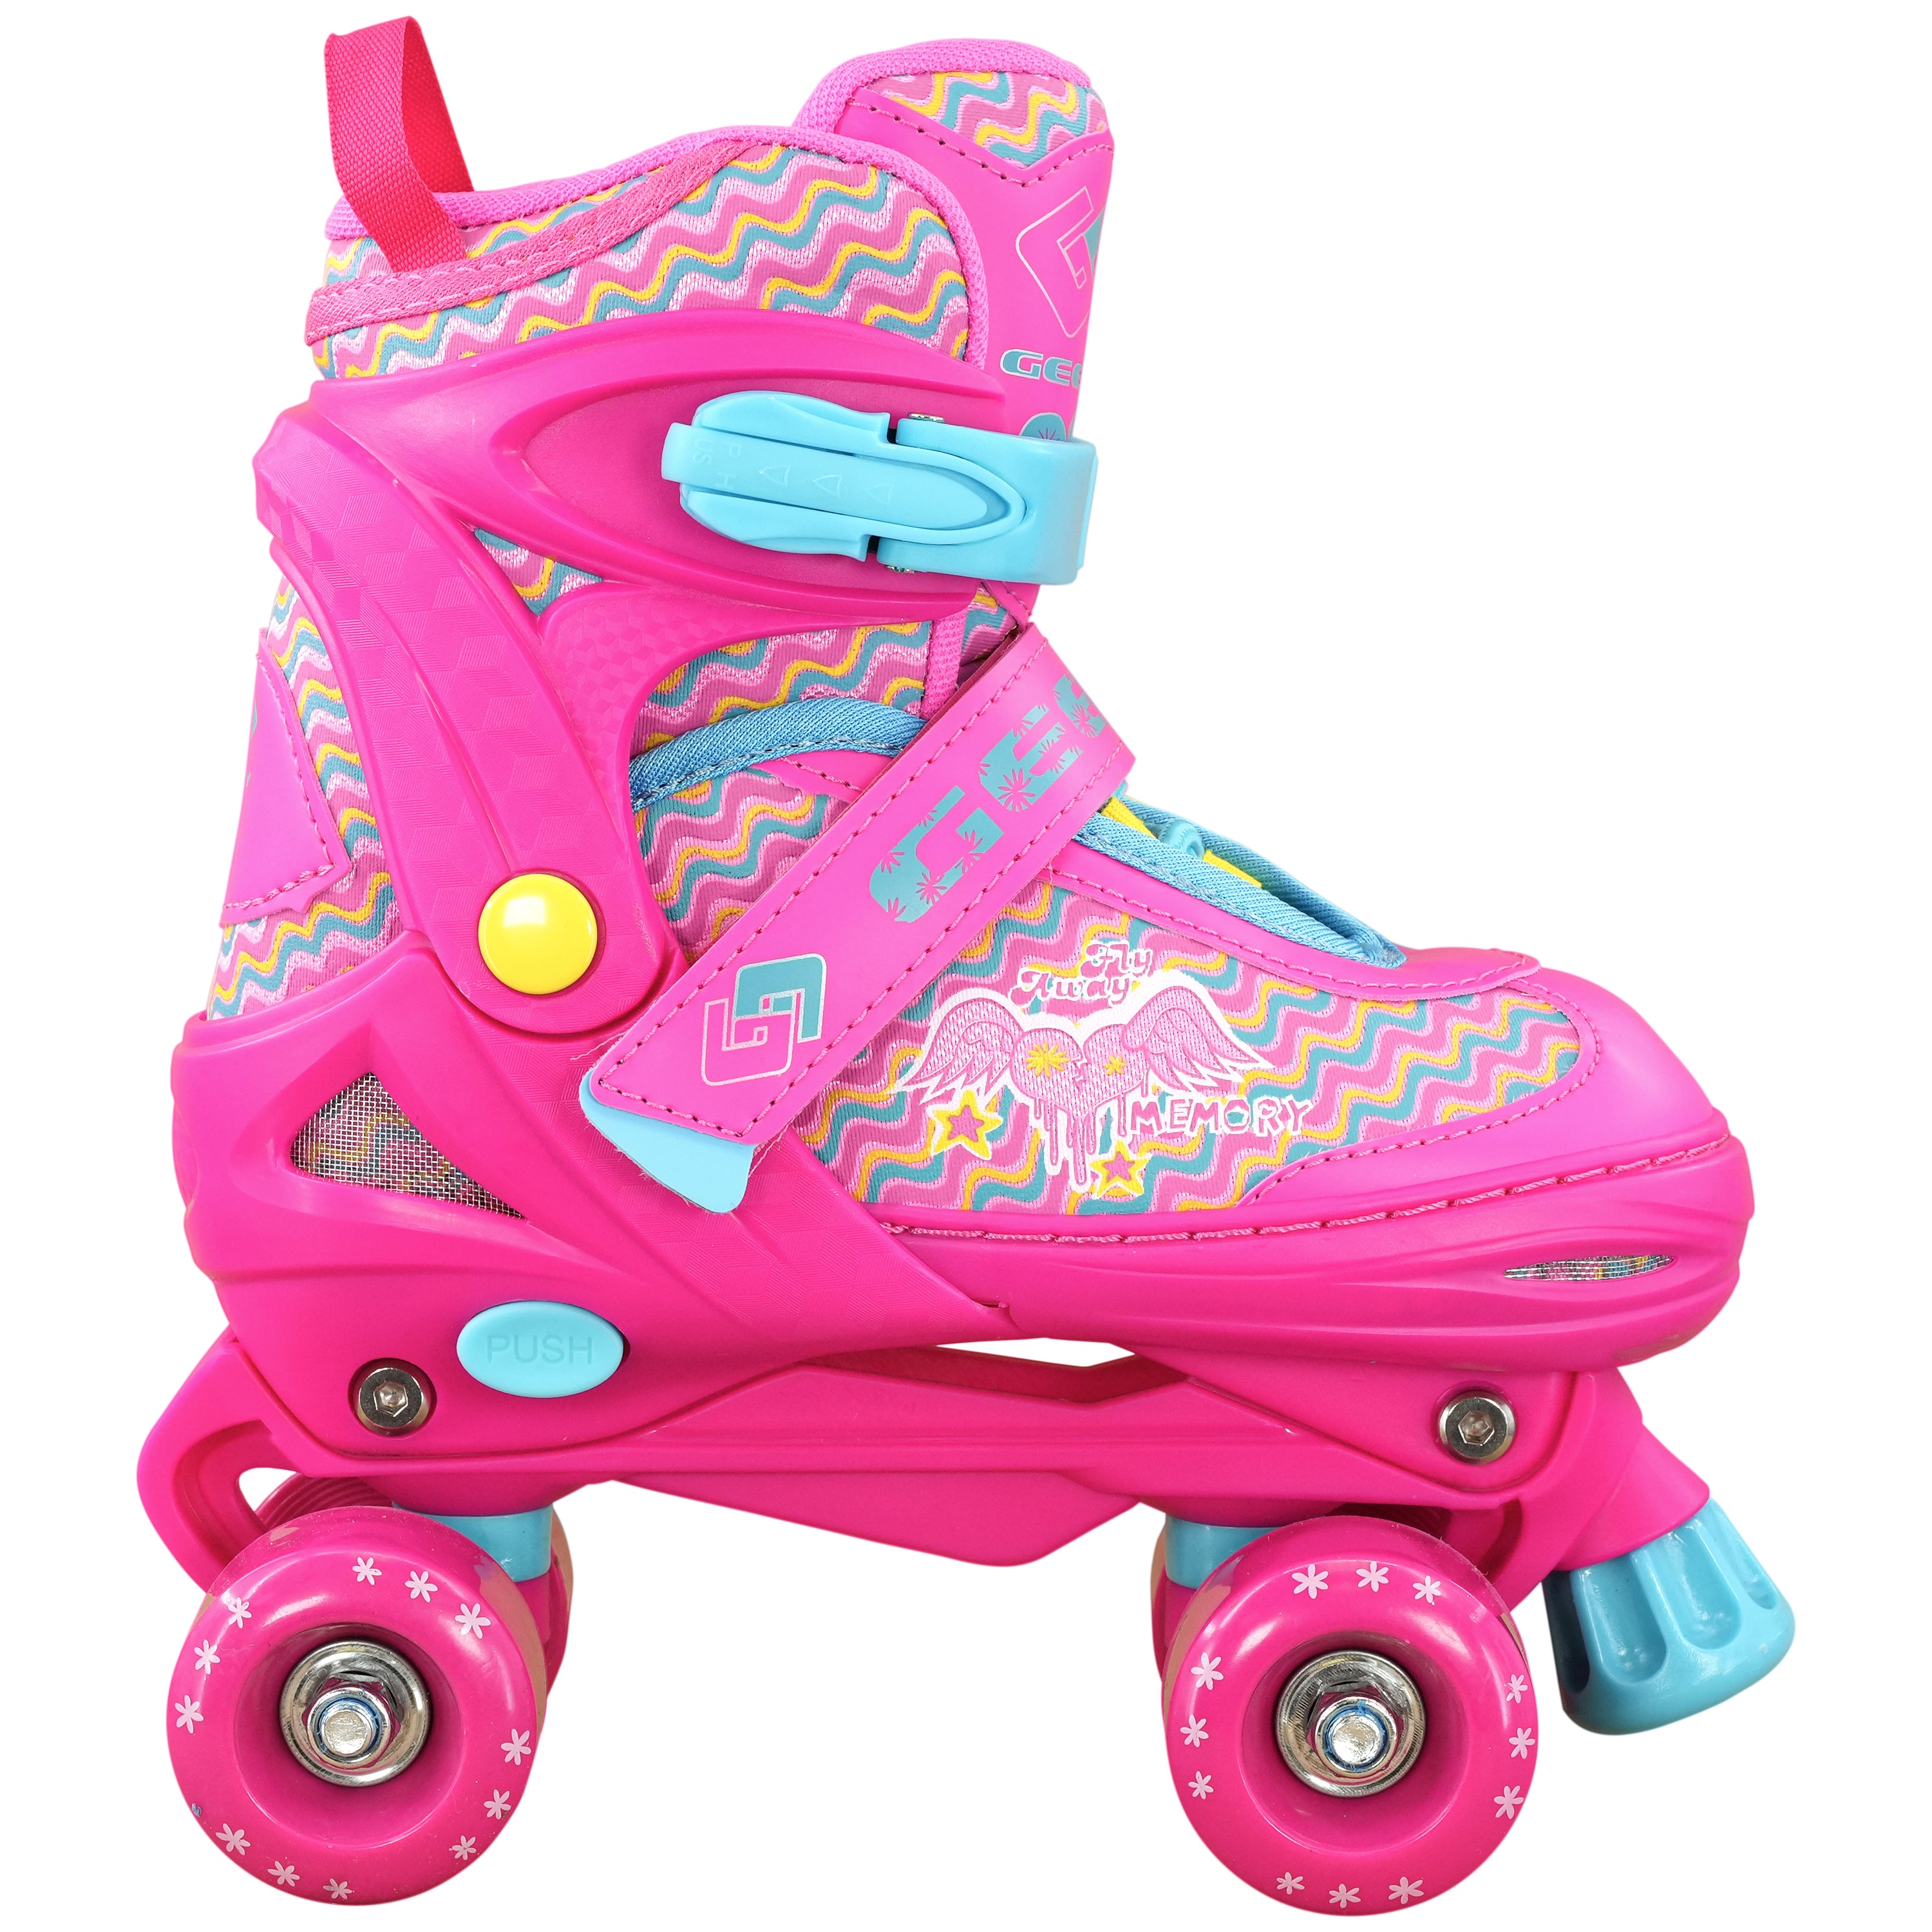 Pink Roller Skates for Kids with 4 Wheel Adjustable Sizes The Magic Toy Shop - The Magic Toy Shop